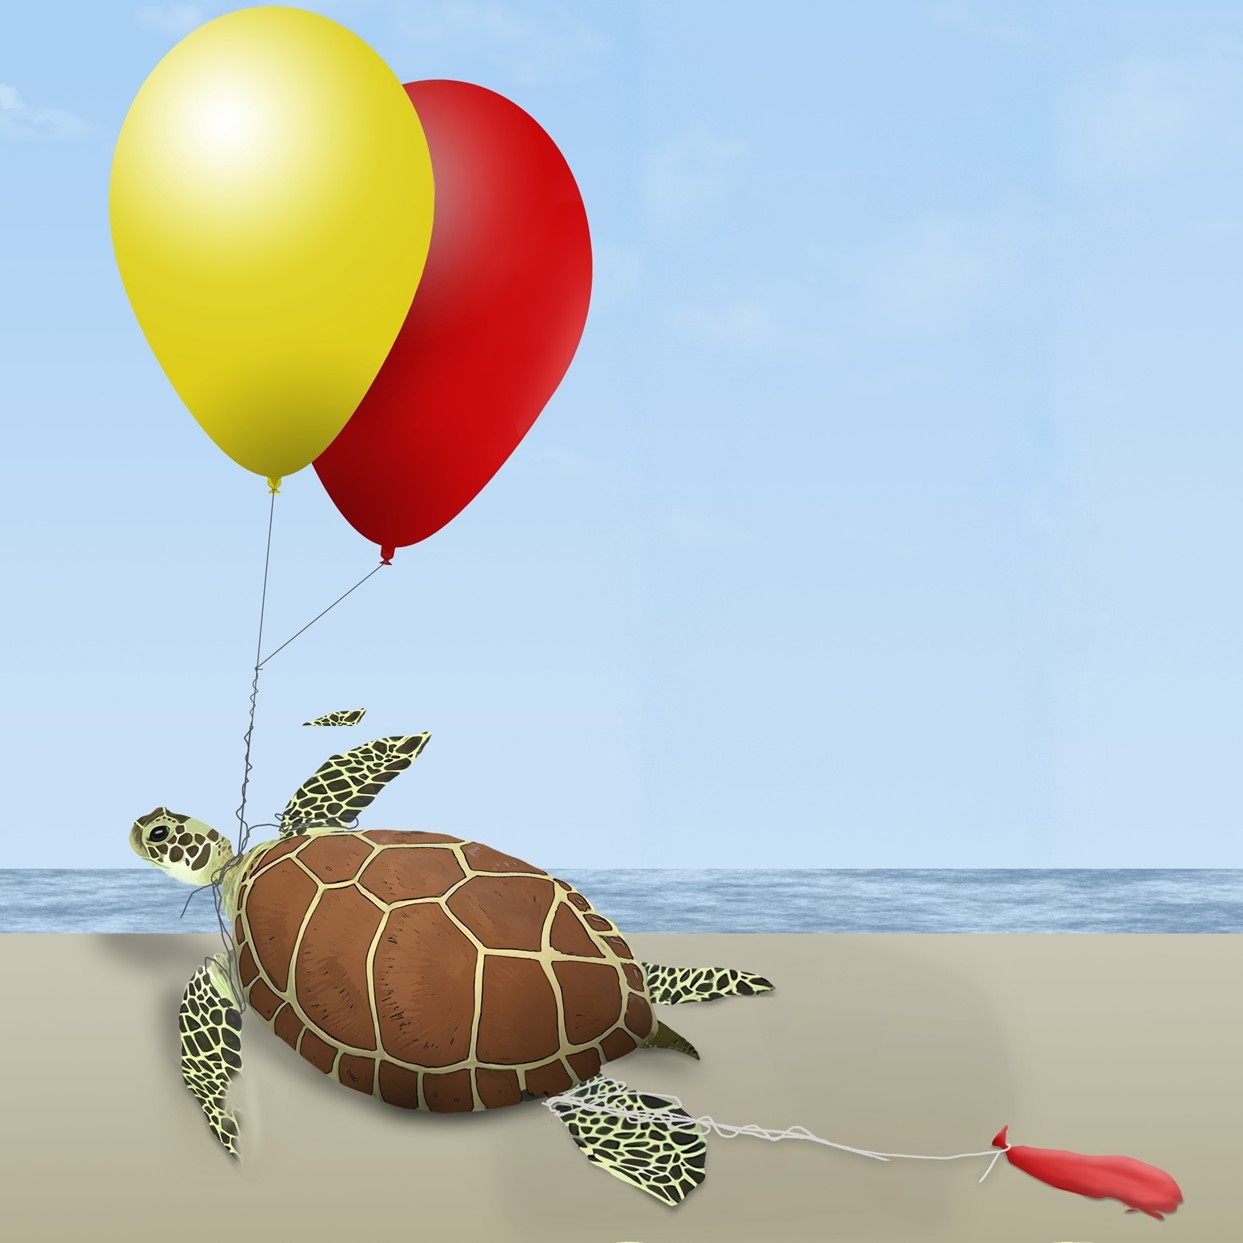 turtle caught in balloons and string